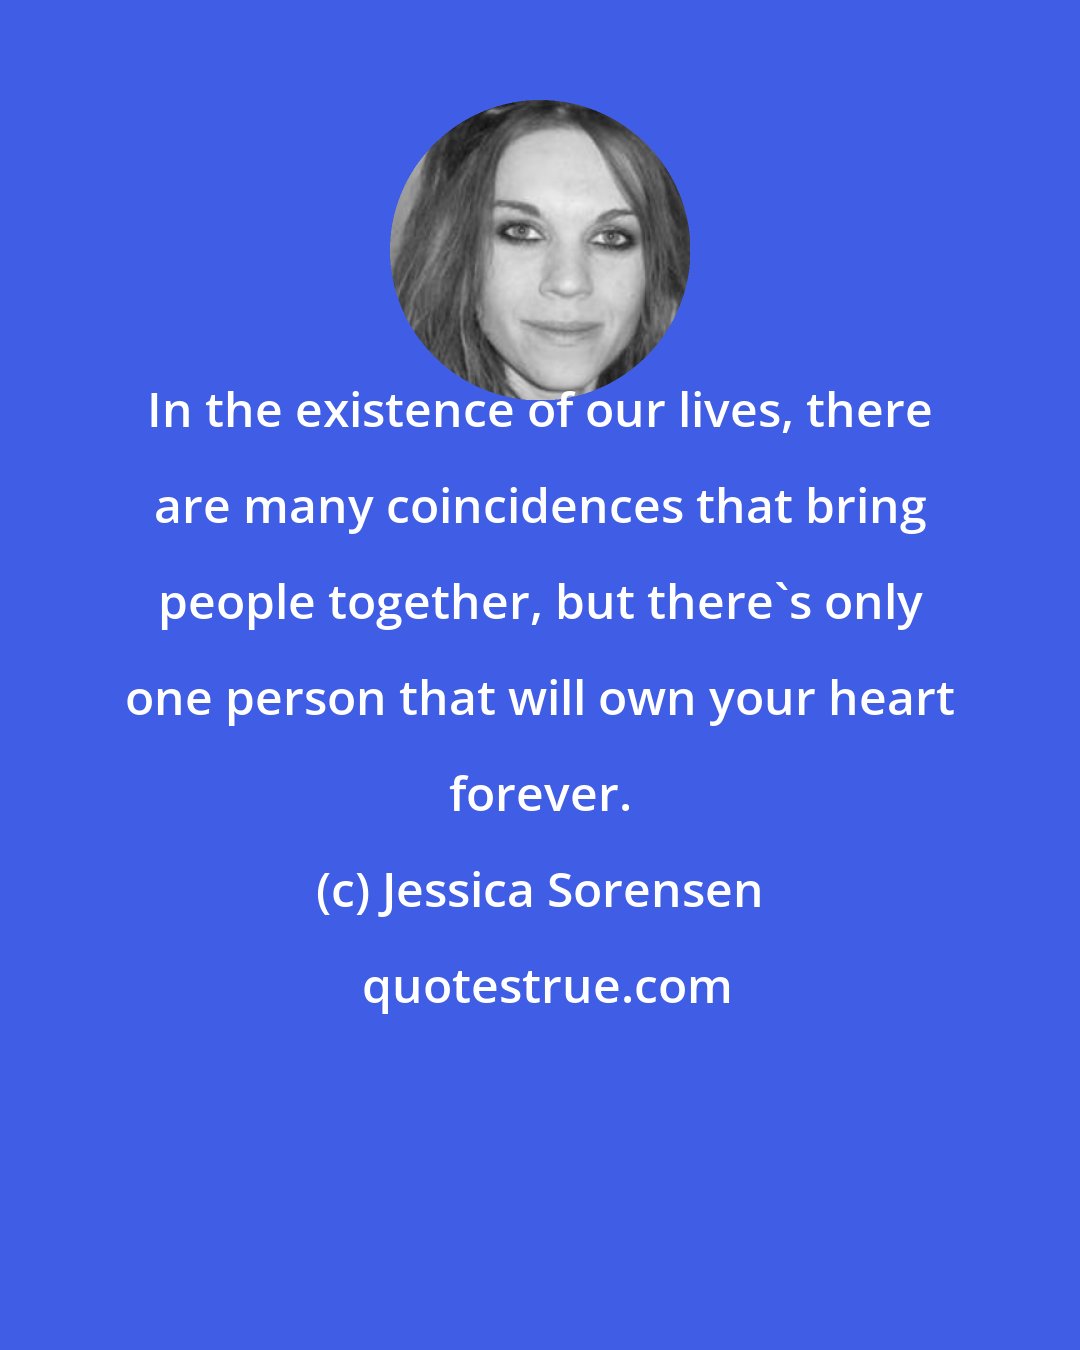 Jessica Sorensen: In the existence of our lives, there are many coincidences that bring people together, but there's only one person that will own your heart forever.